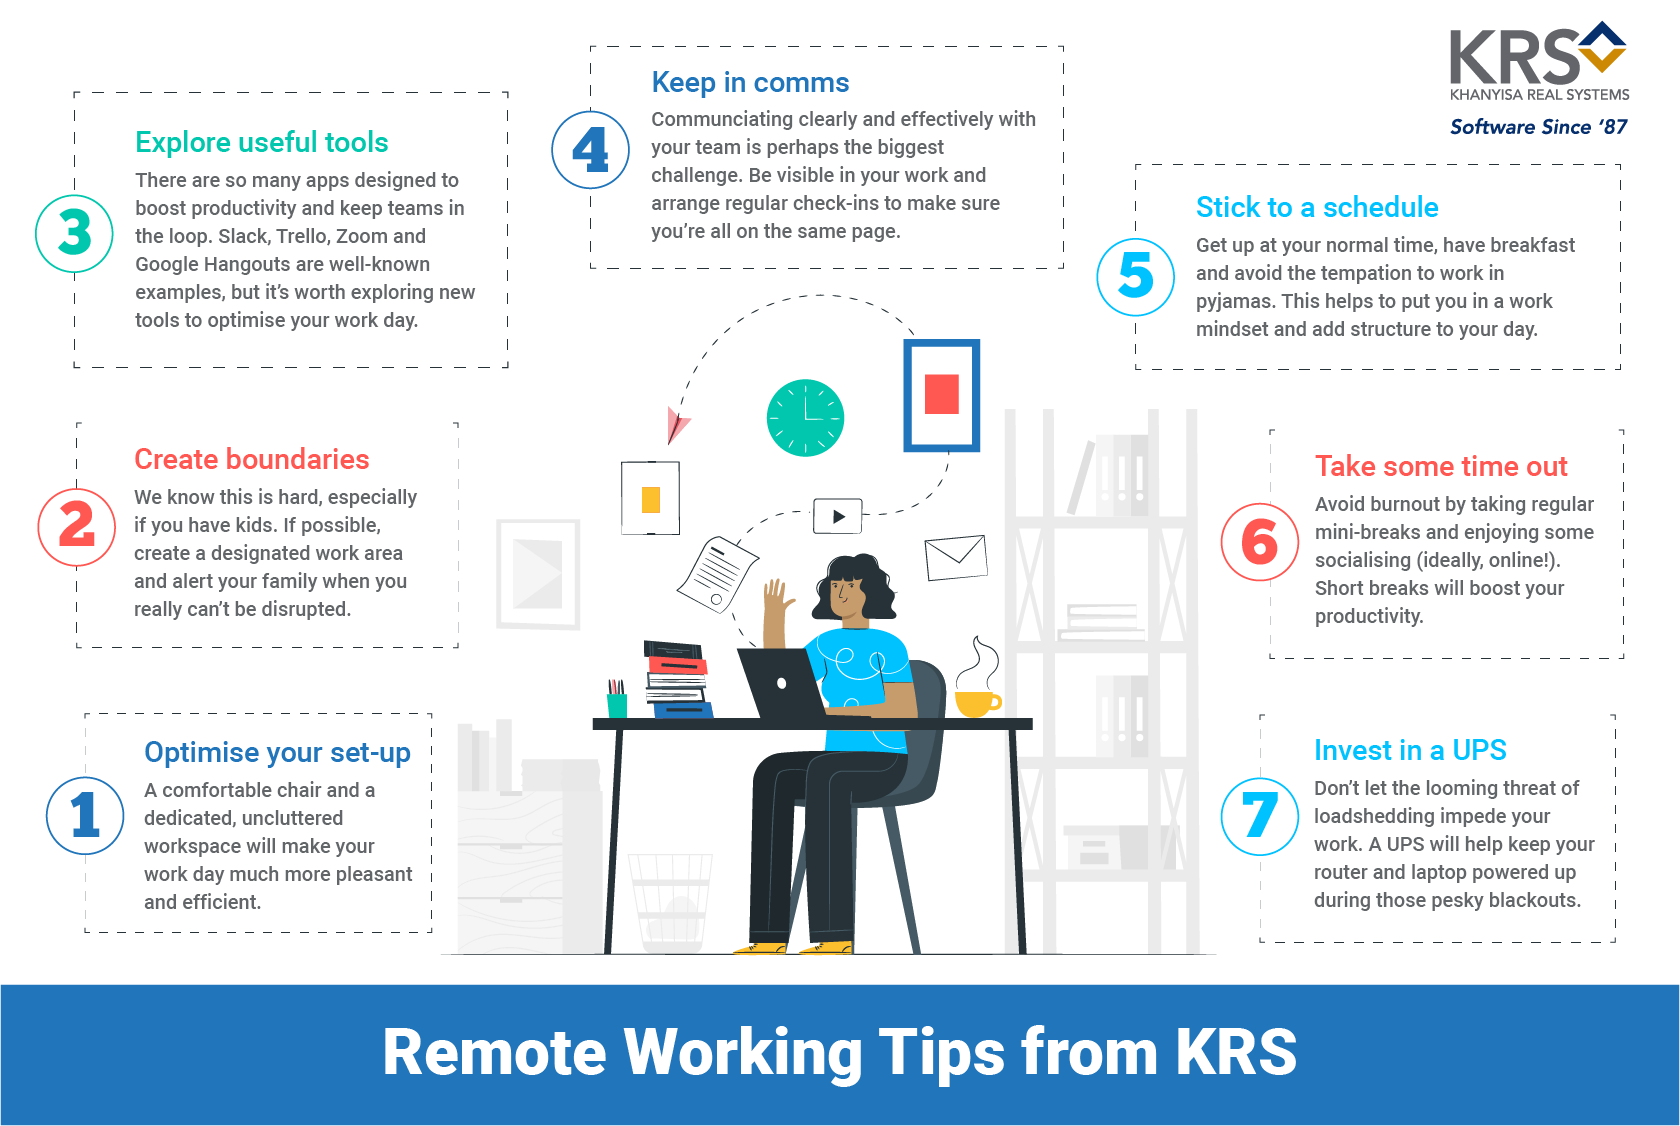 Working from home tips from KRS